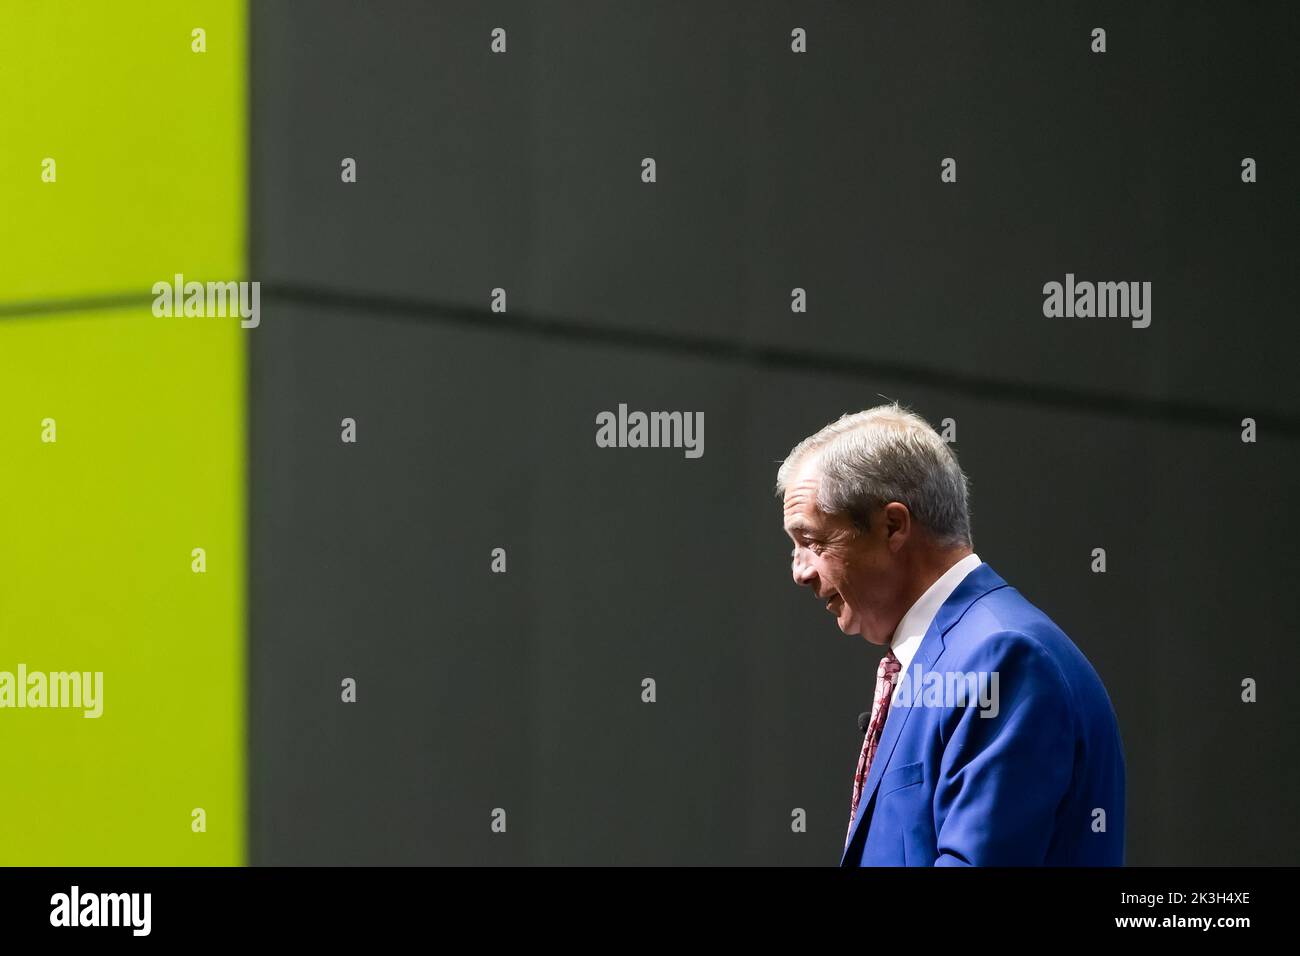 Melbourne, Australia, 26 September, 2022. Nigel Farage during An Evening With Nigel Farage at The Melbourne Convention and Exhibition Centre on September 26, 2022 in Melbourne, Australia. Credit: Dave Hewison/Speed Media/Alamy Live News Stock Photo